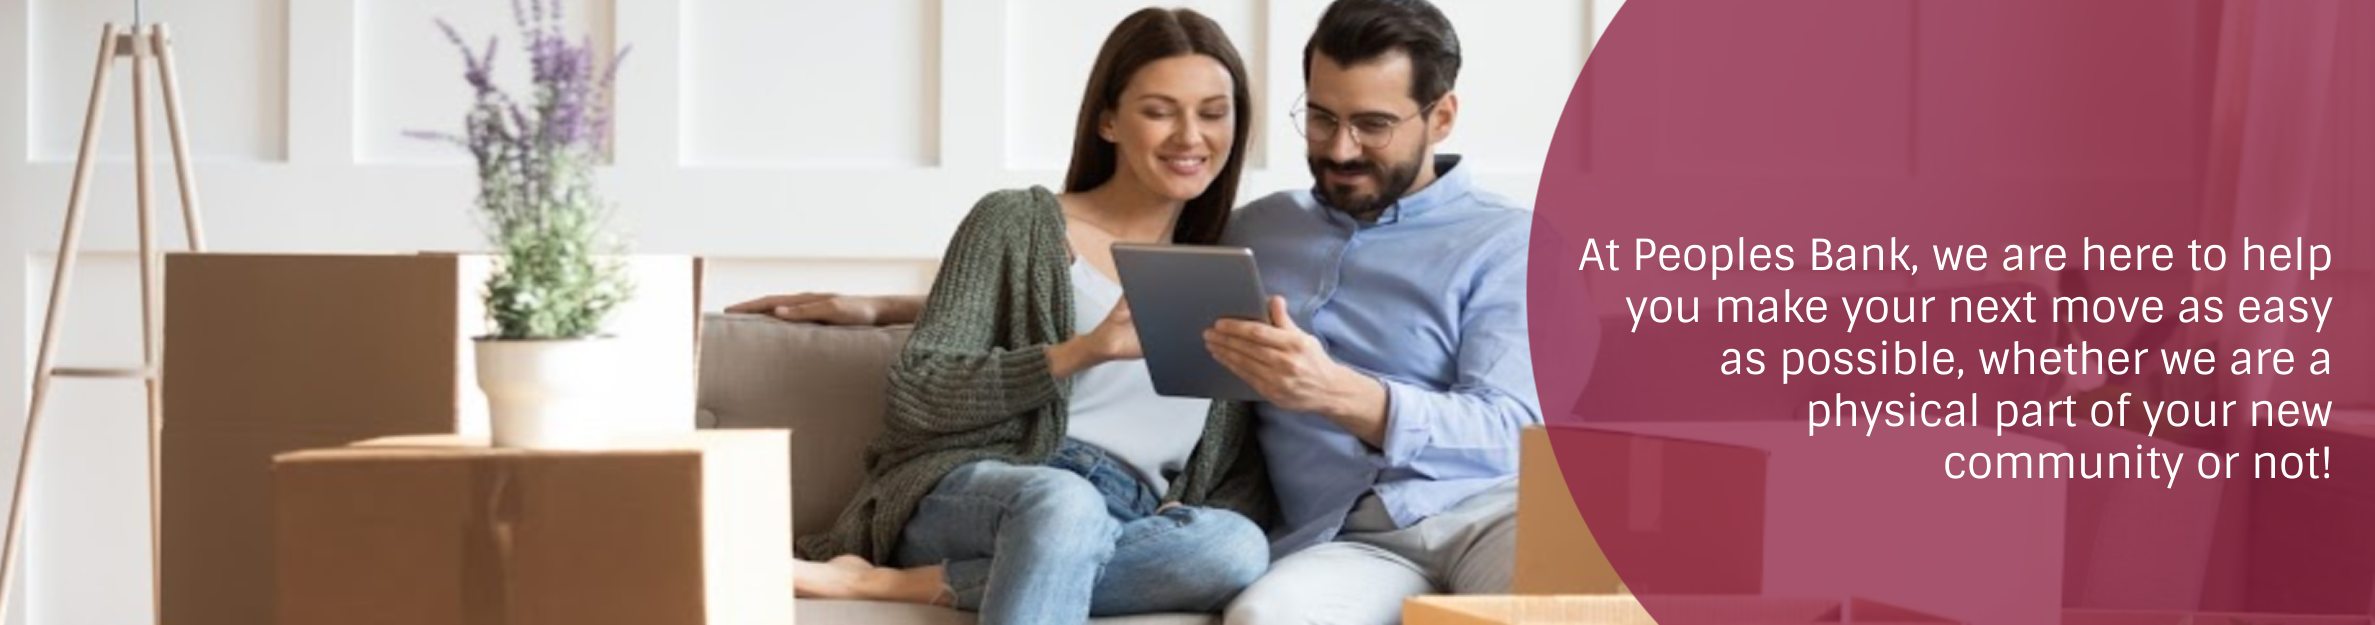 Photo: Couple sitting by moving boxes looking at a tablet.
Text: At Peoples Bank, we are here to help you make your next move as easy as possible, whether we are a physical part of your new community or not!